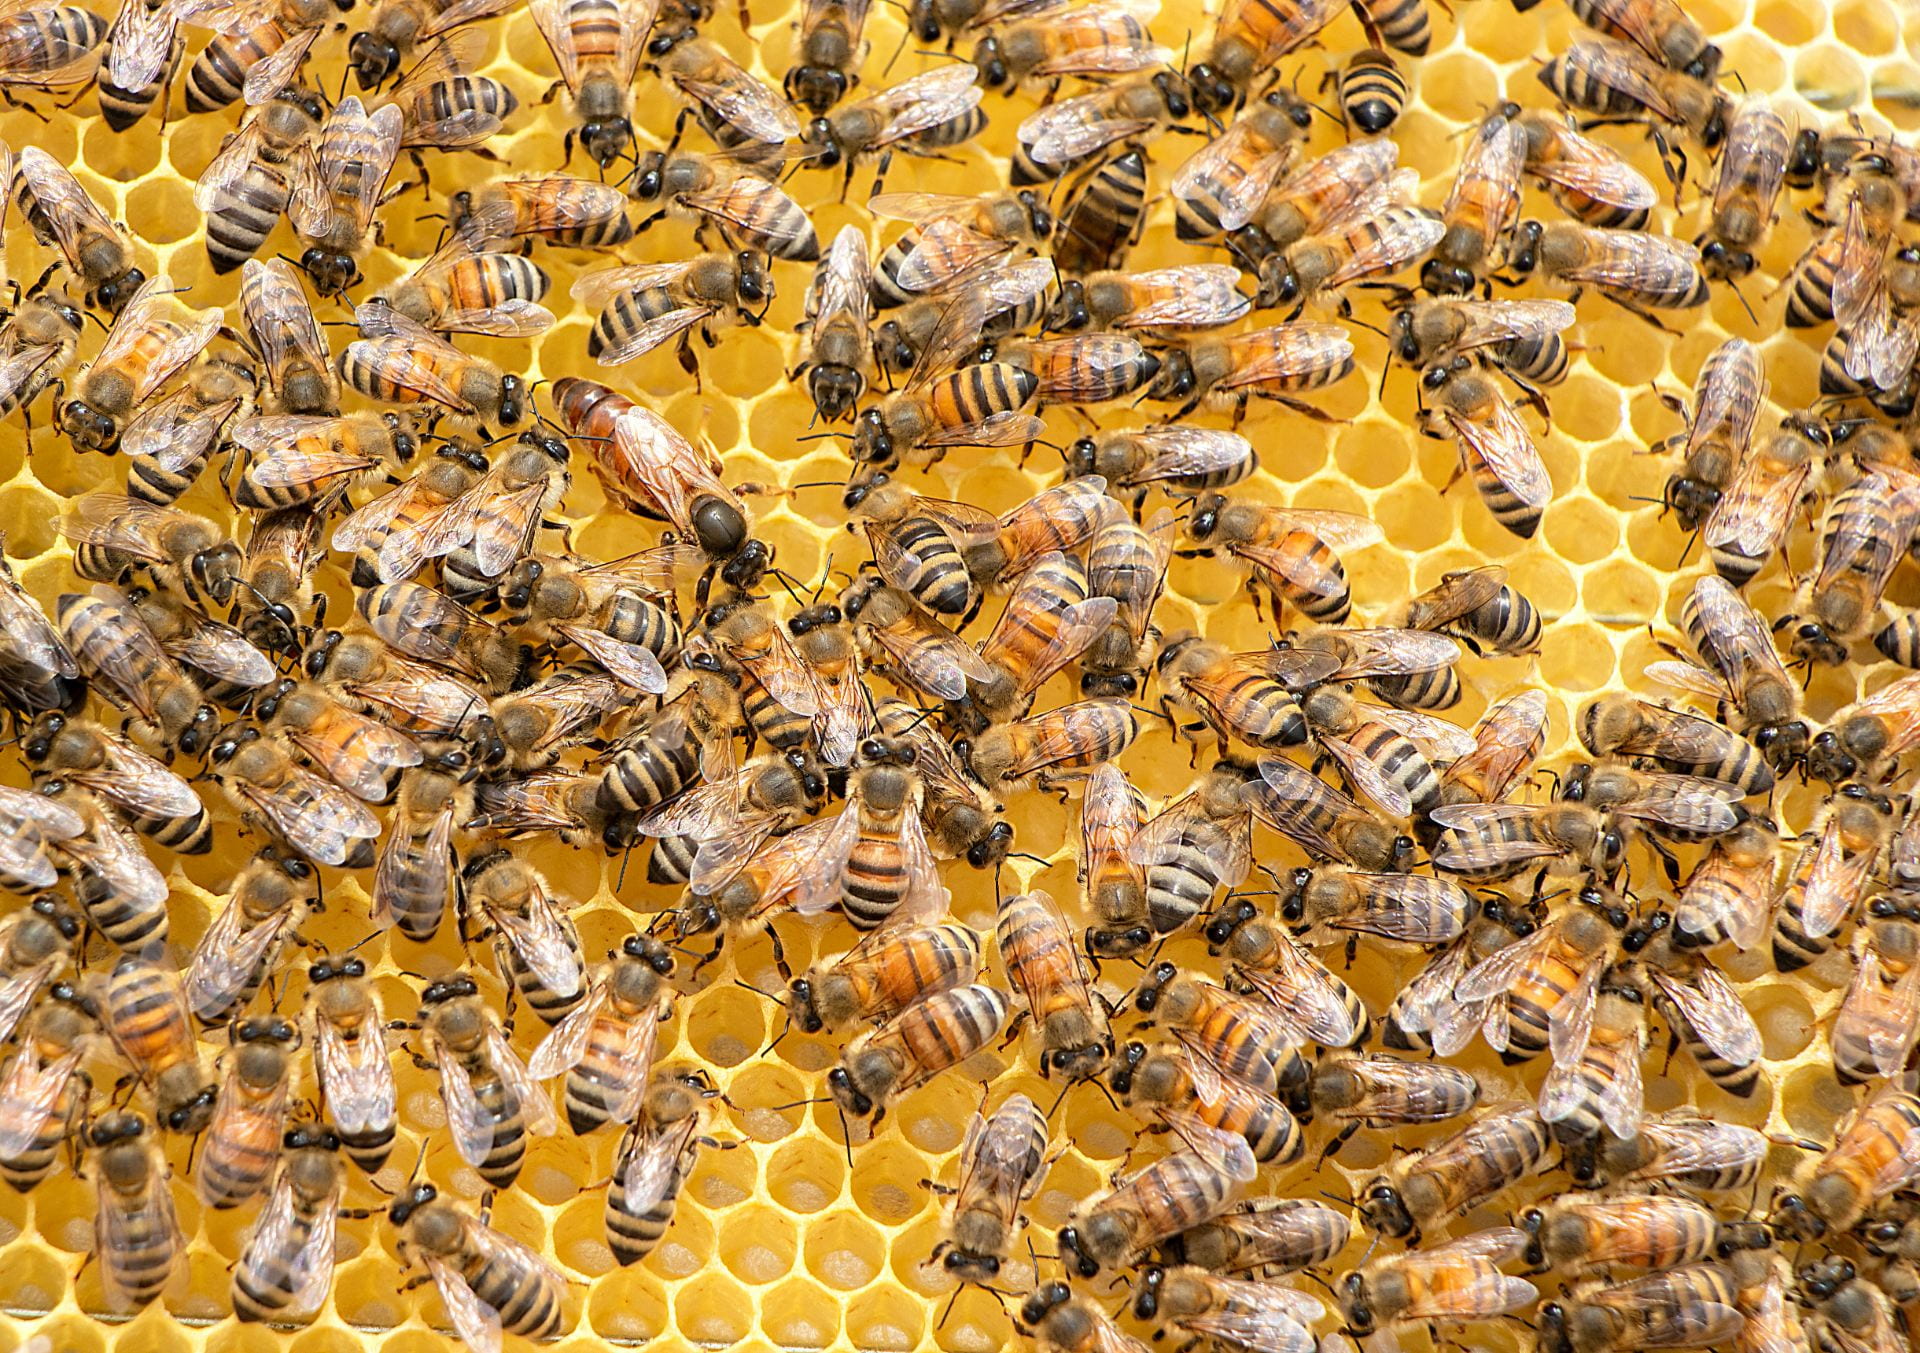 [a photograph of a swarm of bees sitting on golden honeycomb. There are many bustling workers surrounding a significantly larger queen bee.]